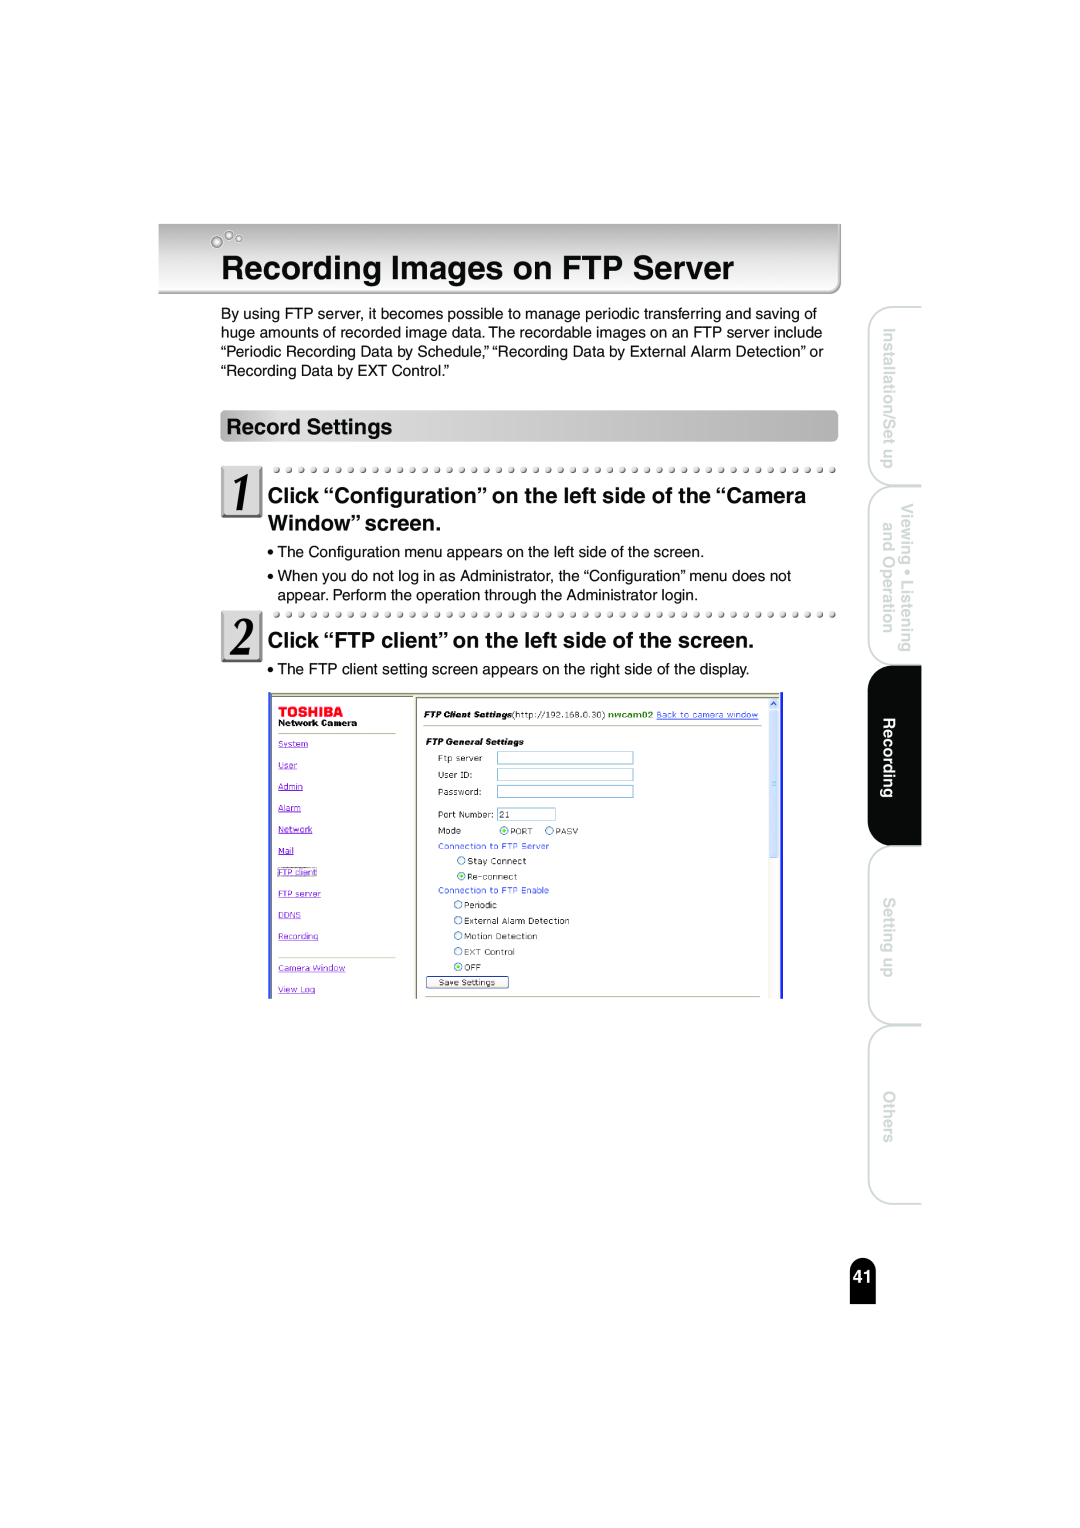 Toshiba IK-WB02A manual Recording Images on FTP Server, Record Settings, Click “FTP client” on the left side of the screen 